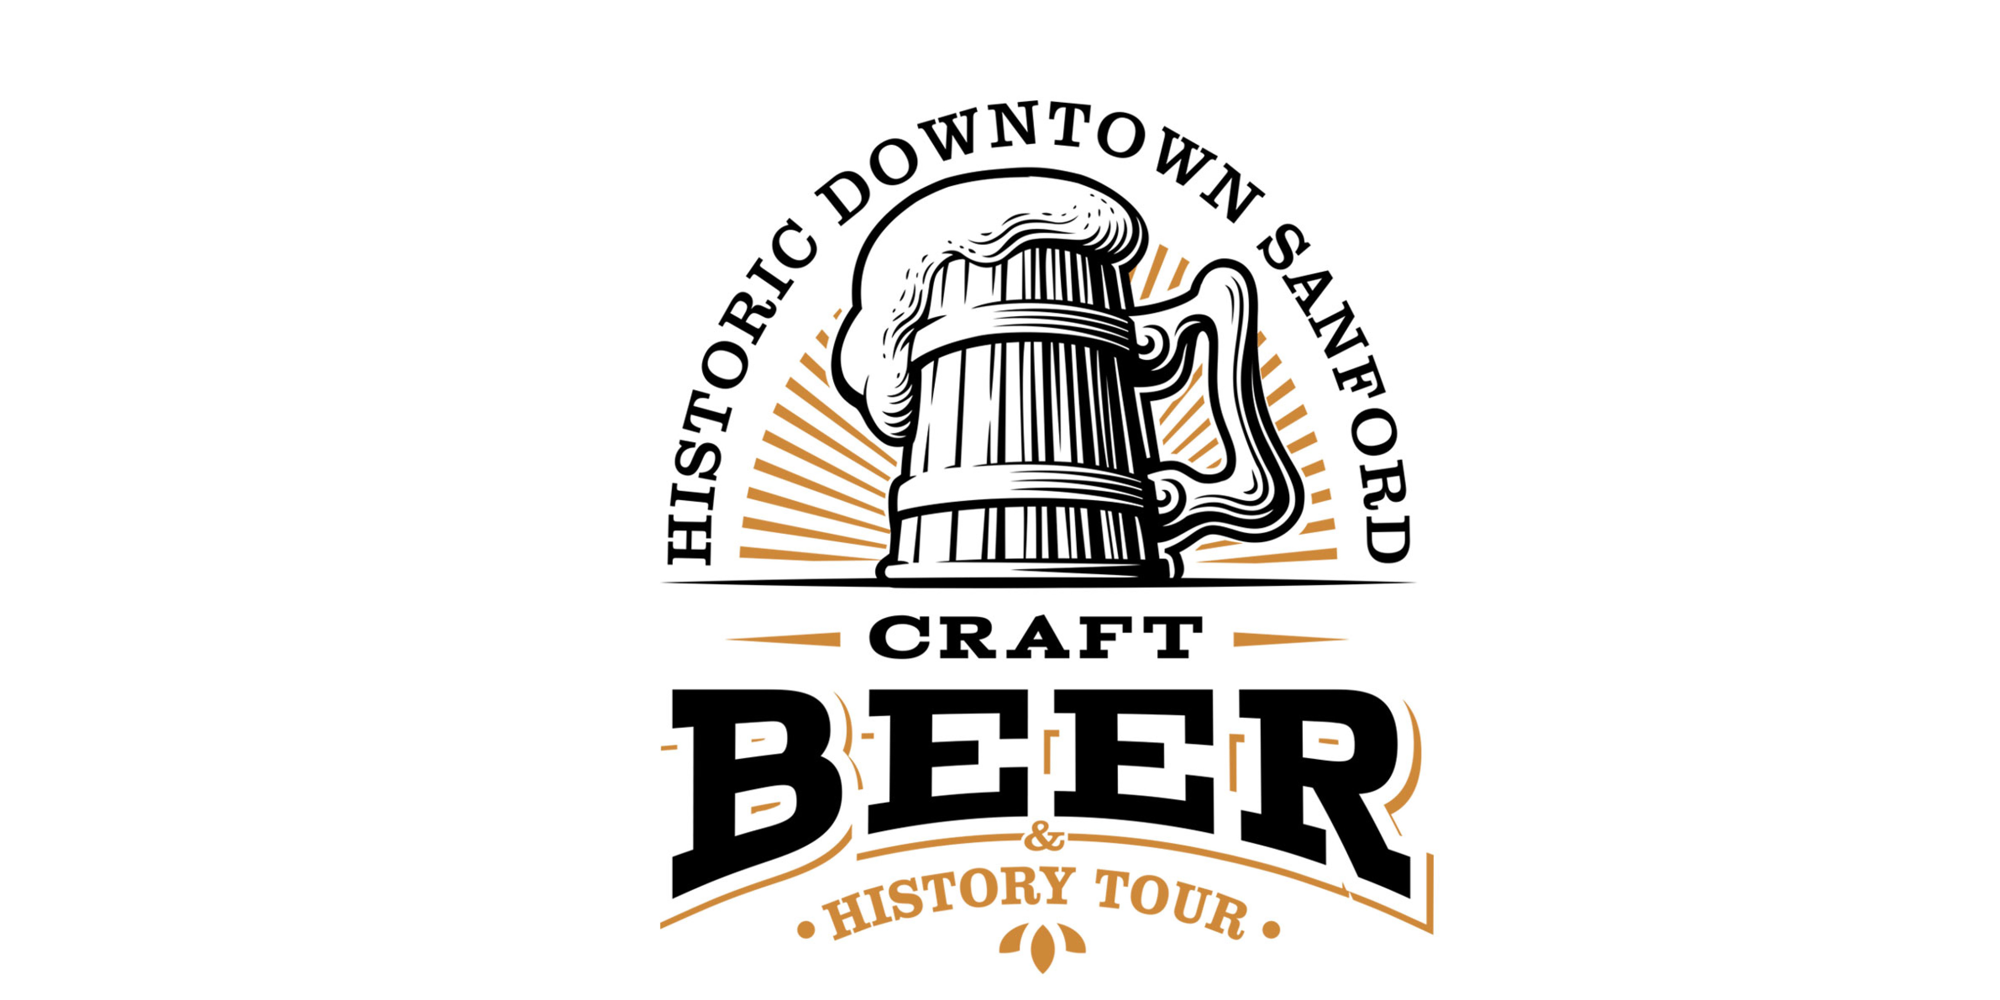 Craft Beer and History Tour promotional image